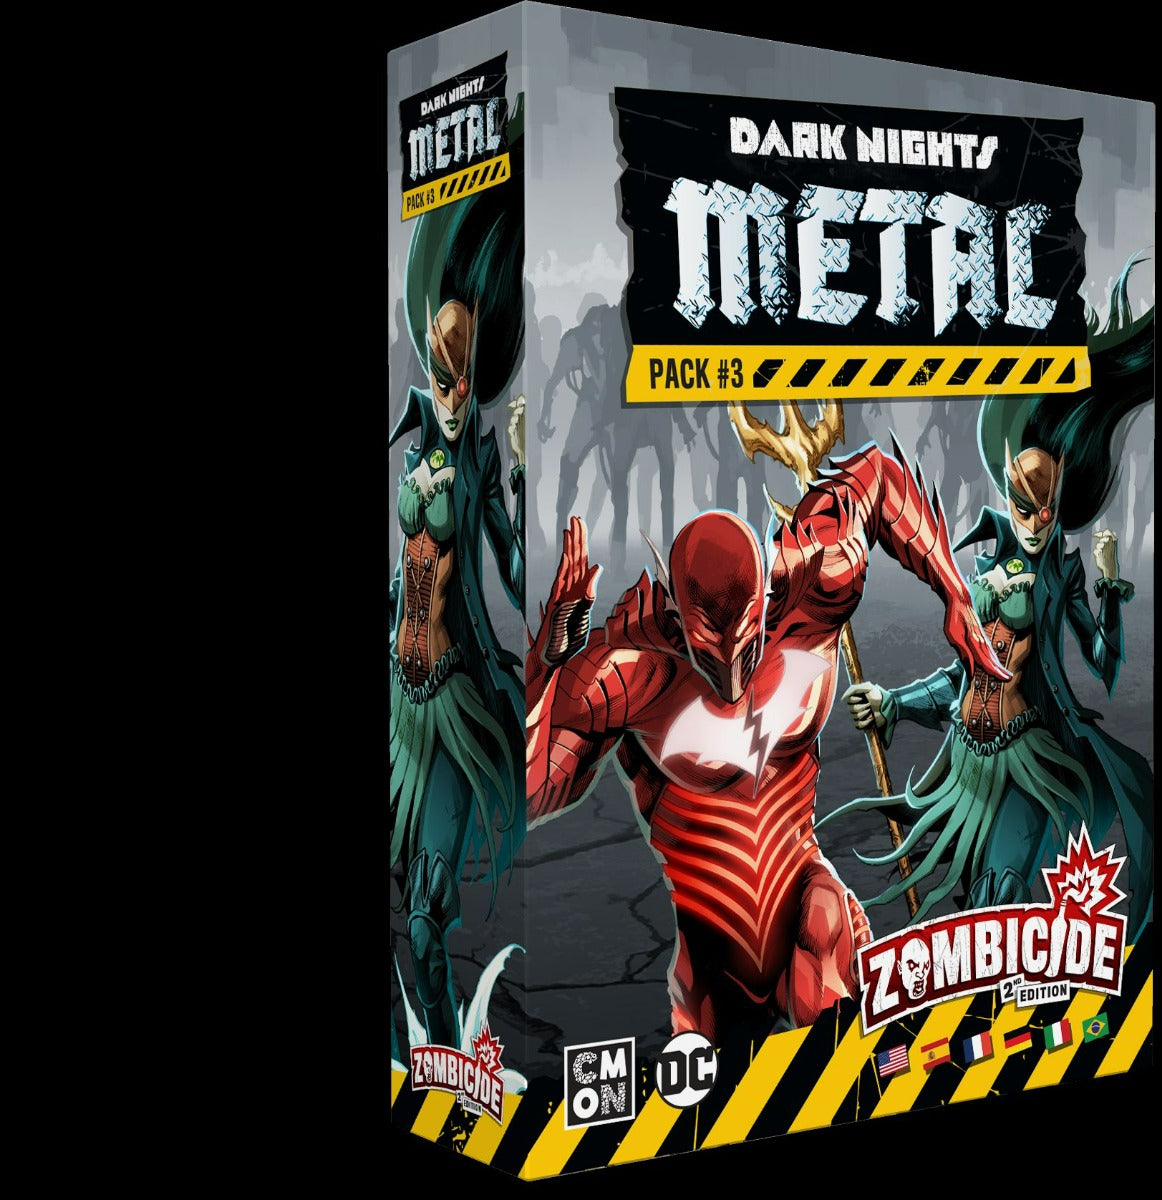 Zombicide 2nd Edition Dark Night Metal Pack 3